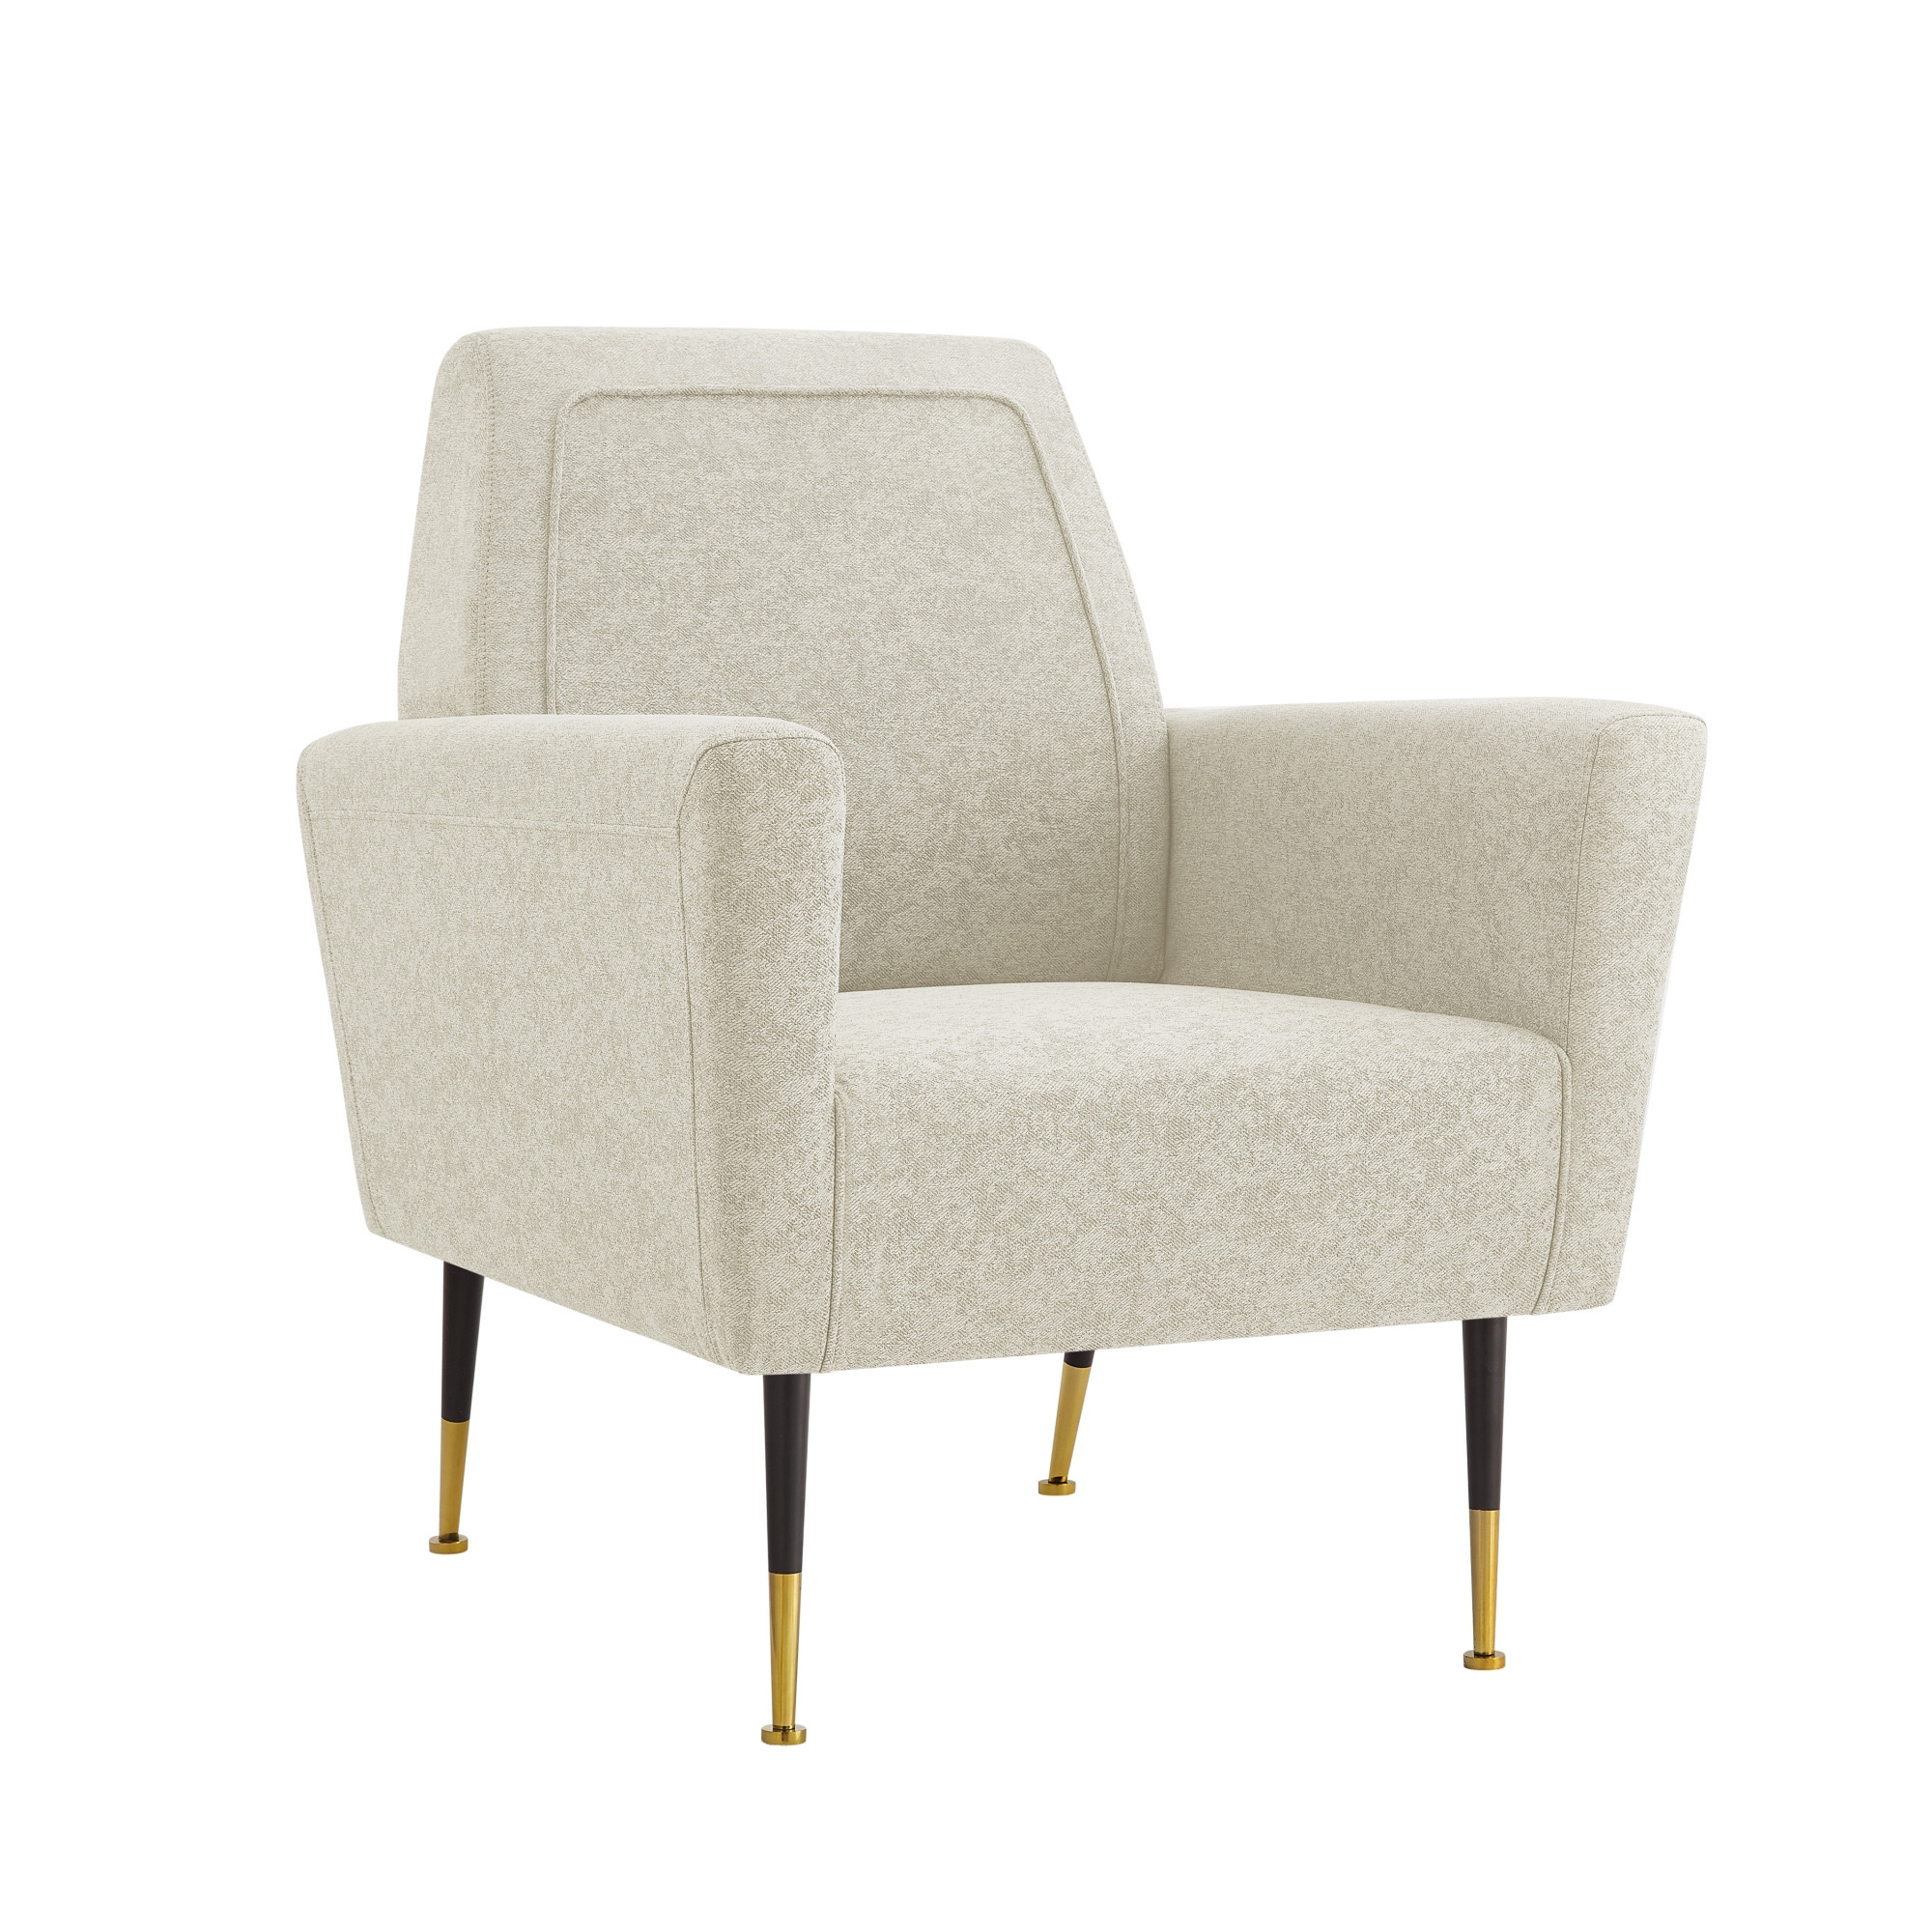 32" Beige And Gold Linen Arm Chair-533826-1